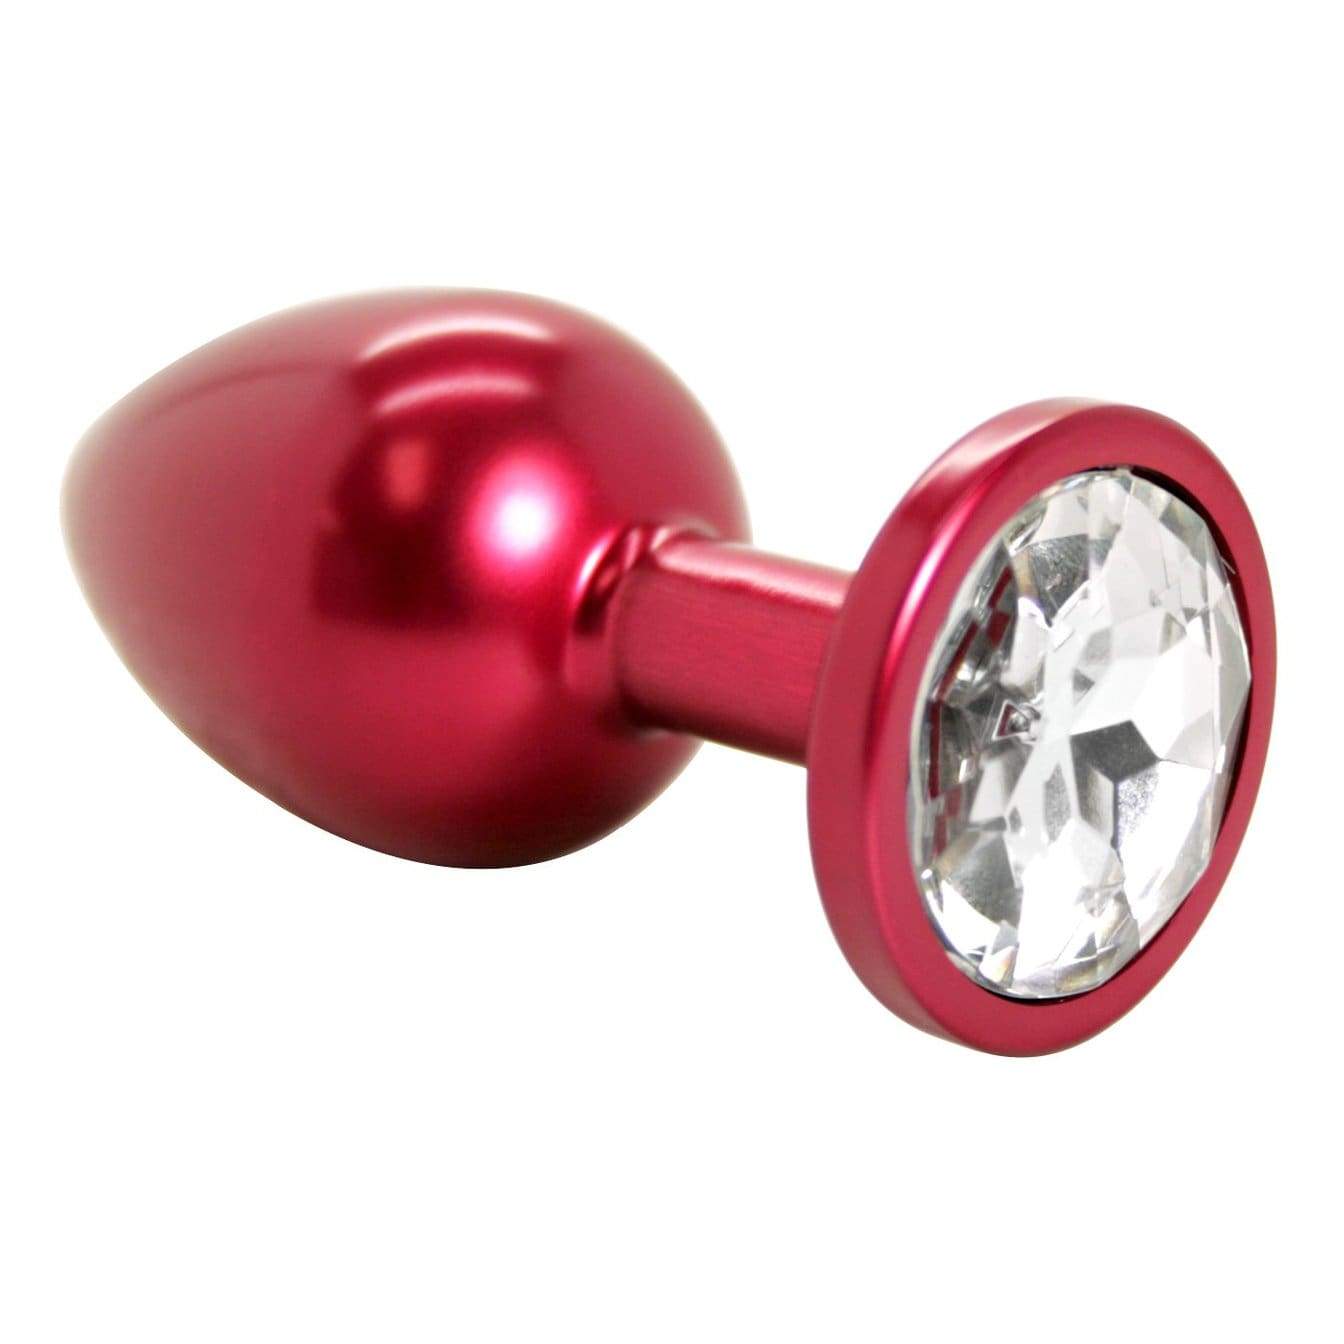 Jeweled Aluminum Anal Plug - Great for Temperature Play!-BestGSpot